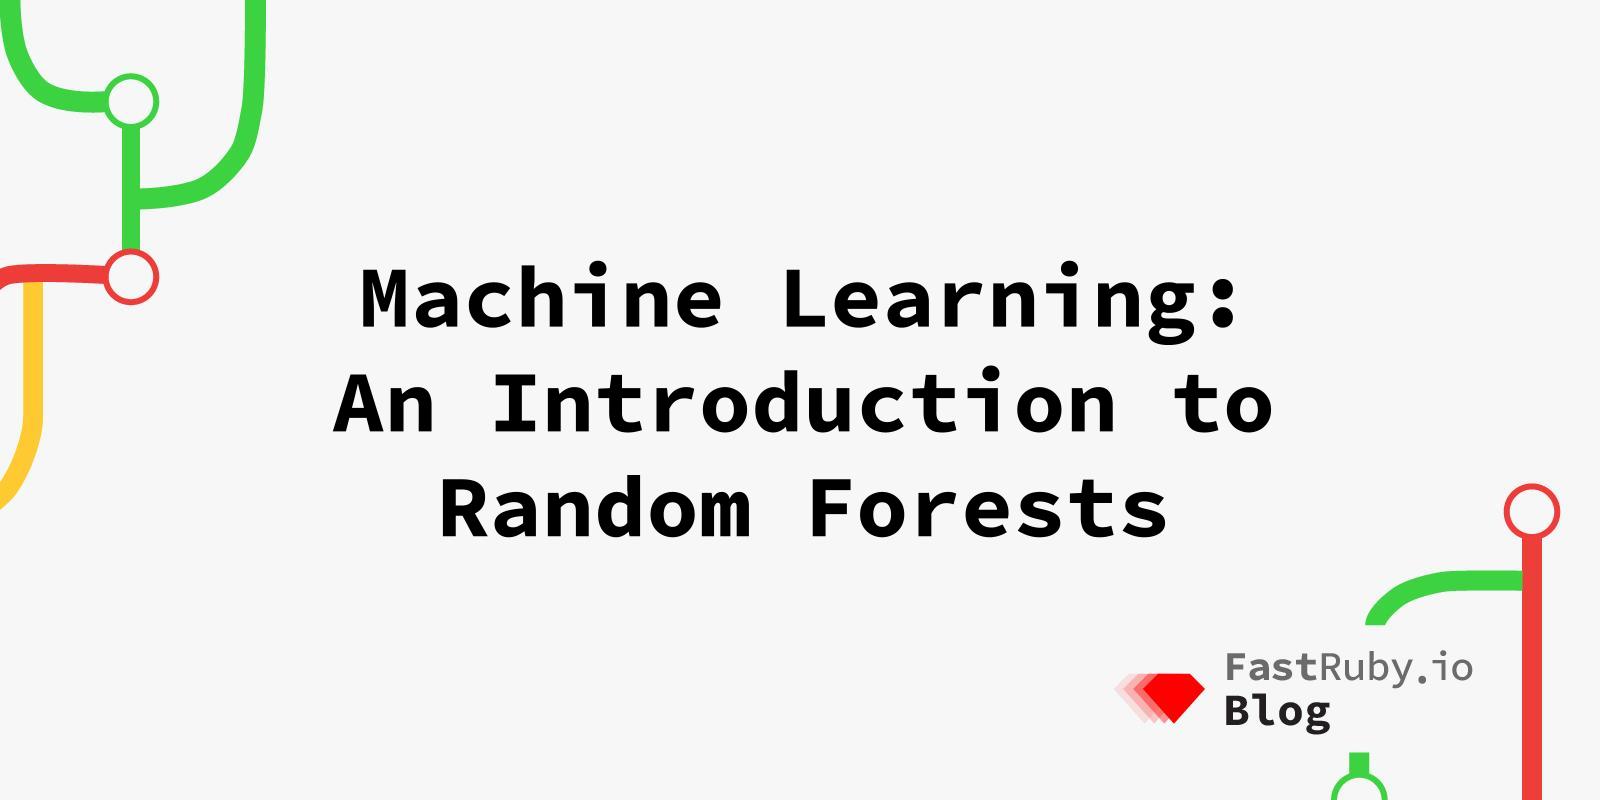 Machine Learning: An Introduction to Random Forests